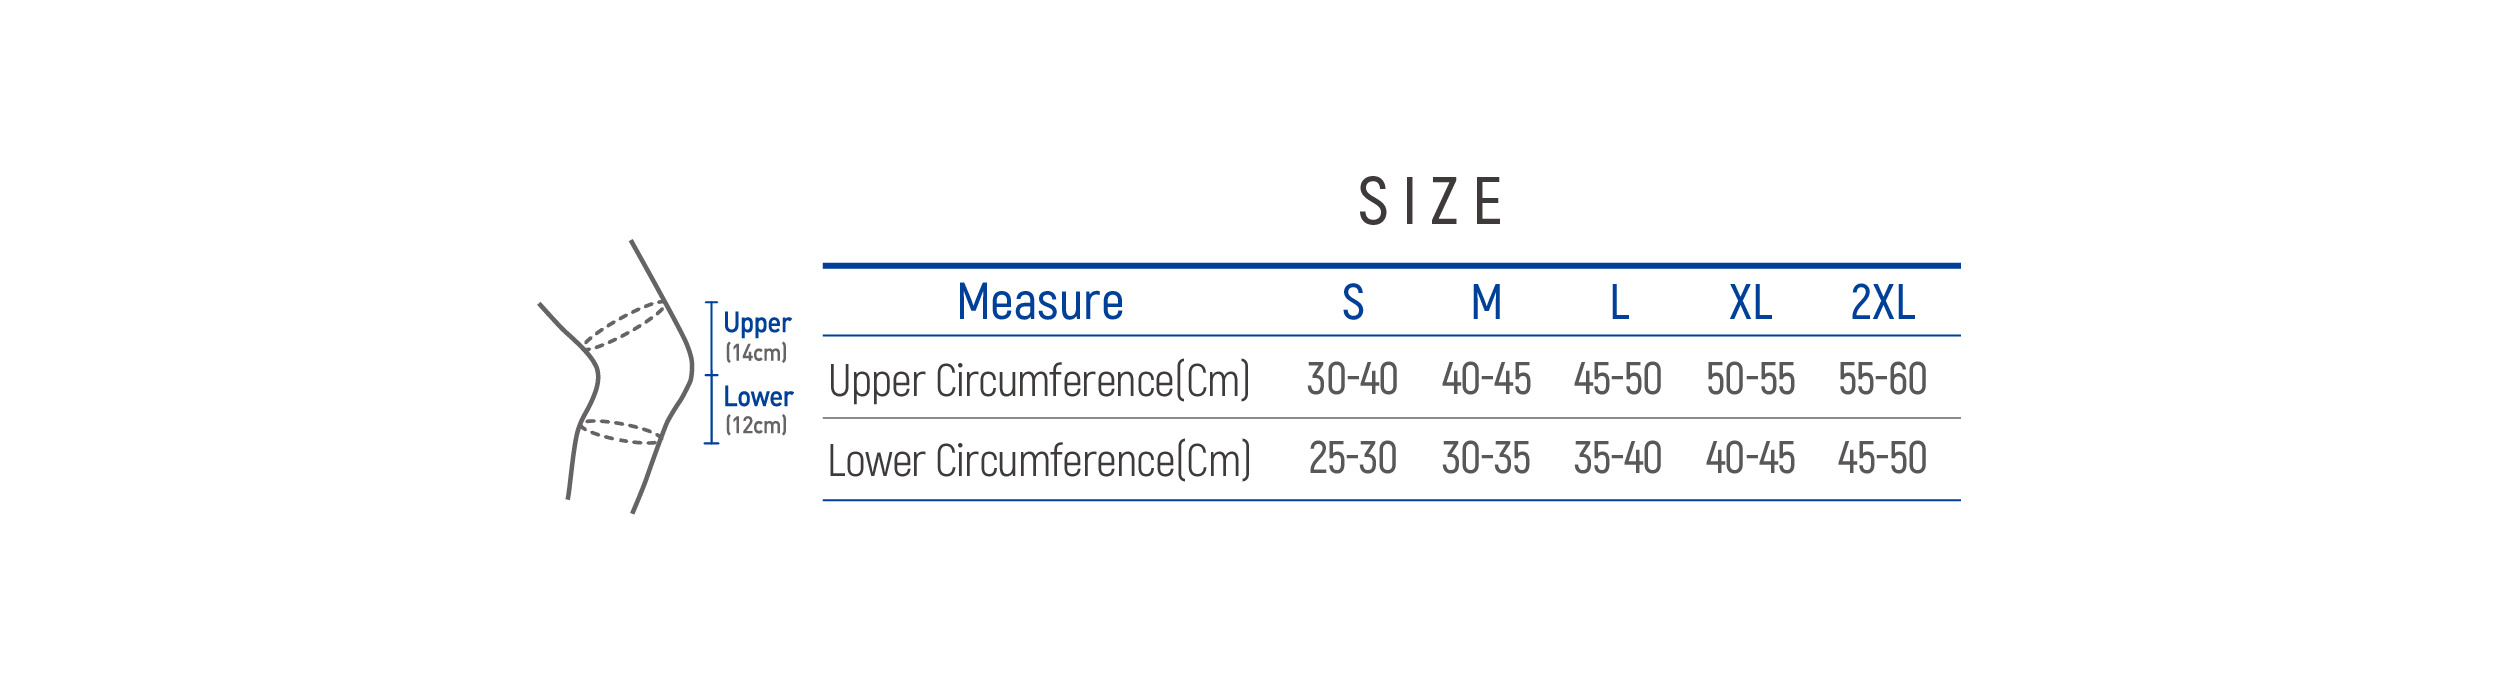 DR-K032 Size table image